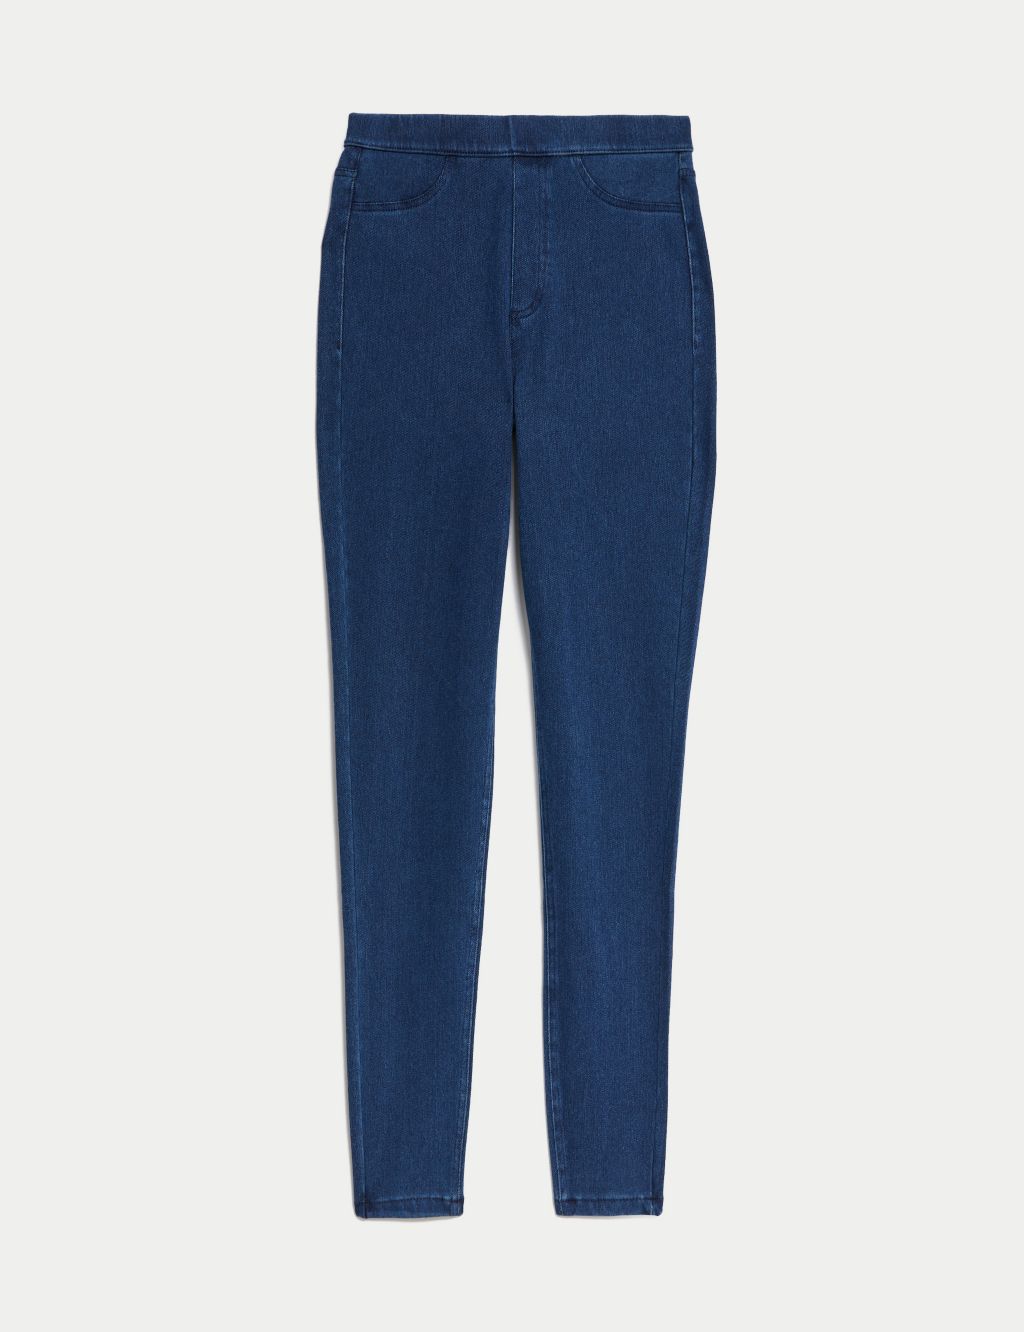 Cosy High Waisted Jeggings image 2